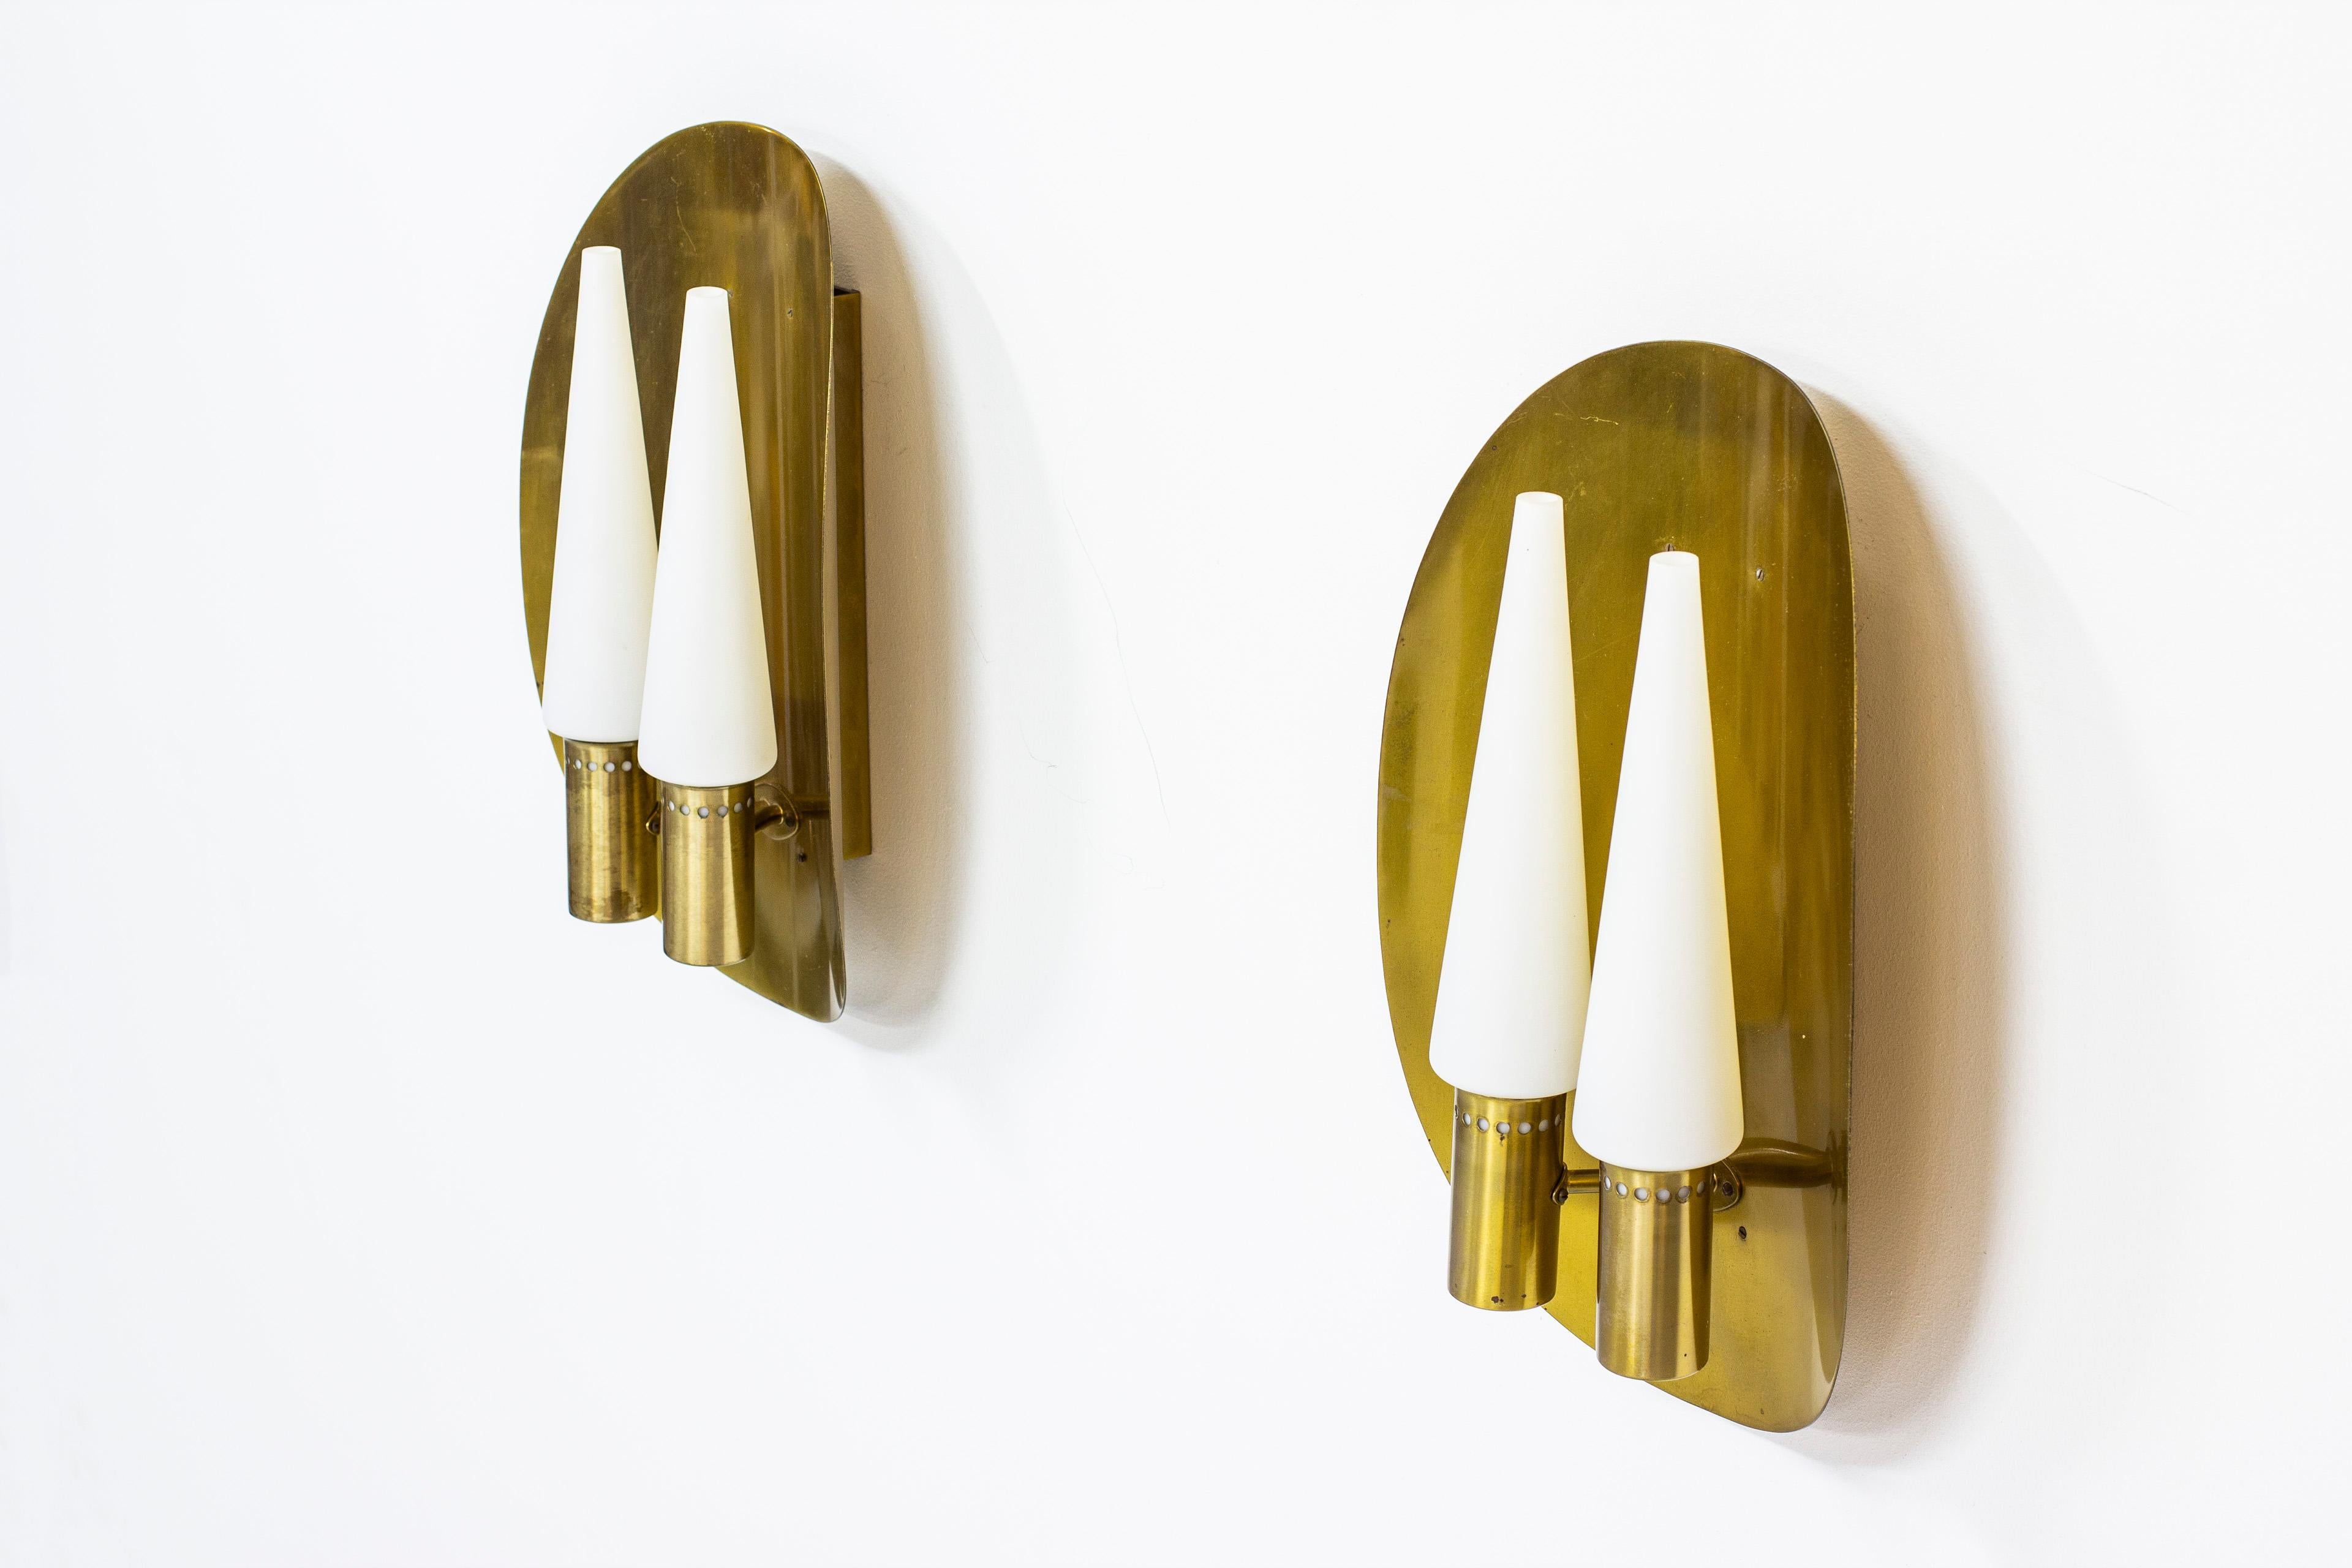 Pair of wall lamps designed by Hans-Agne Jakobsson. Produced by Hans-Agne Jakobsson AB in Sweden, during the 1960s-1970s. Made from solid brass with four conical opaline glass shades. Both lamps signed with label. Very good vintage condition with